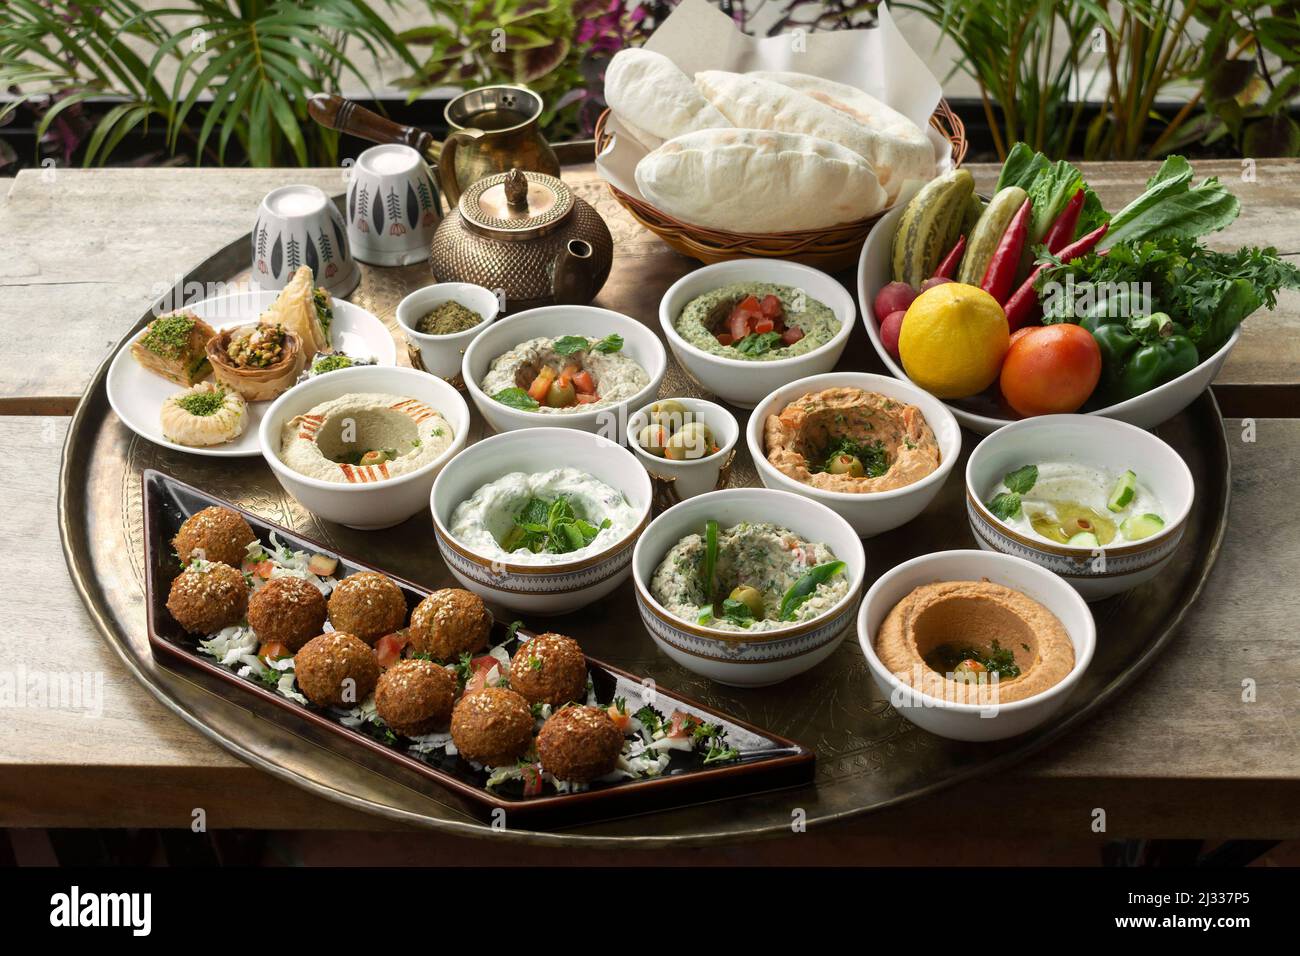 mixed middle eastern meze vegetarian food sharing platter in istanbul turkish restaurant Stock Photo